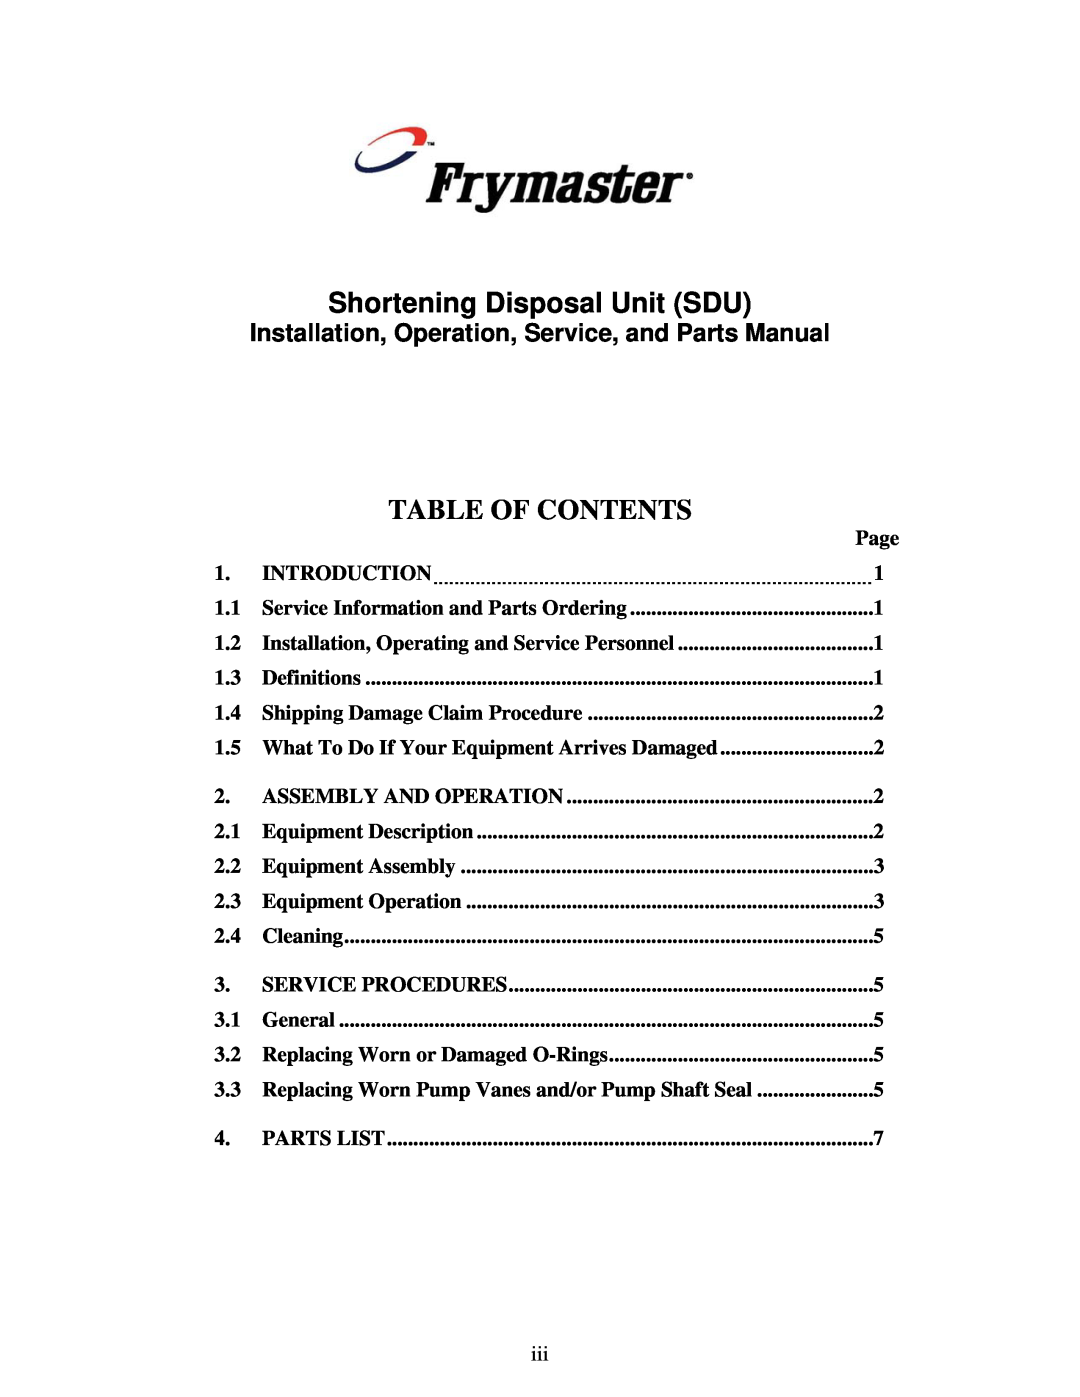 Frymaster BKSDU, SDU90 Shortening Disposal Unit SDU, Installation, Operation, Service, and Parts Manual, Table Of Contents 